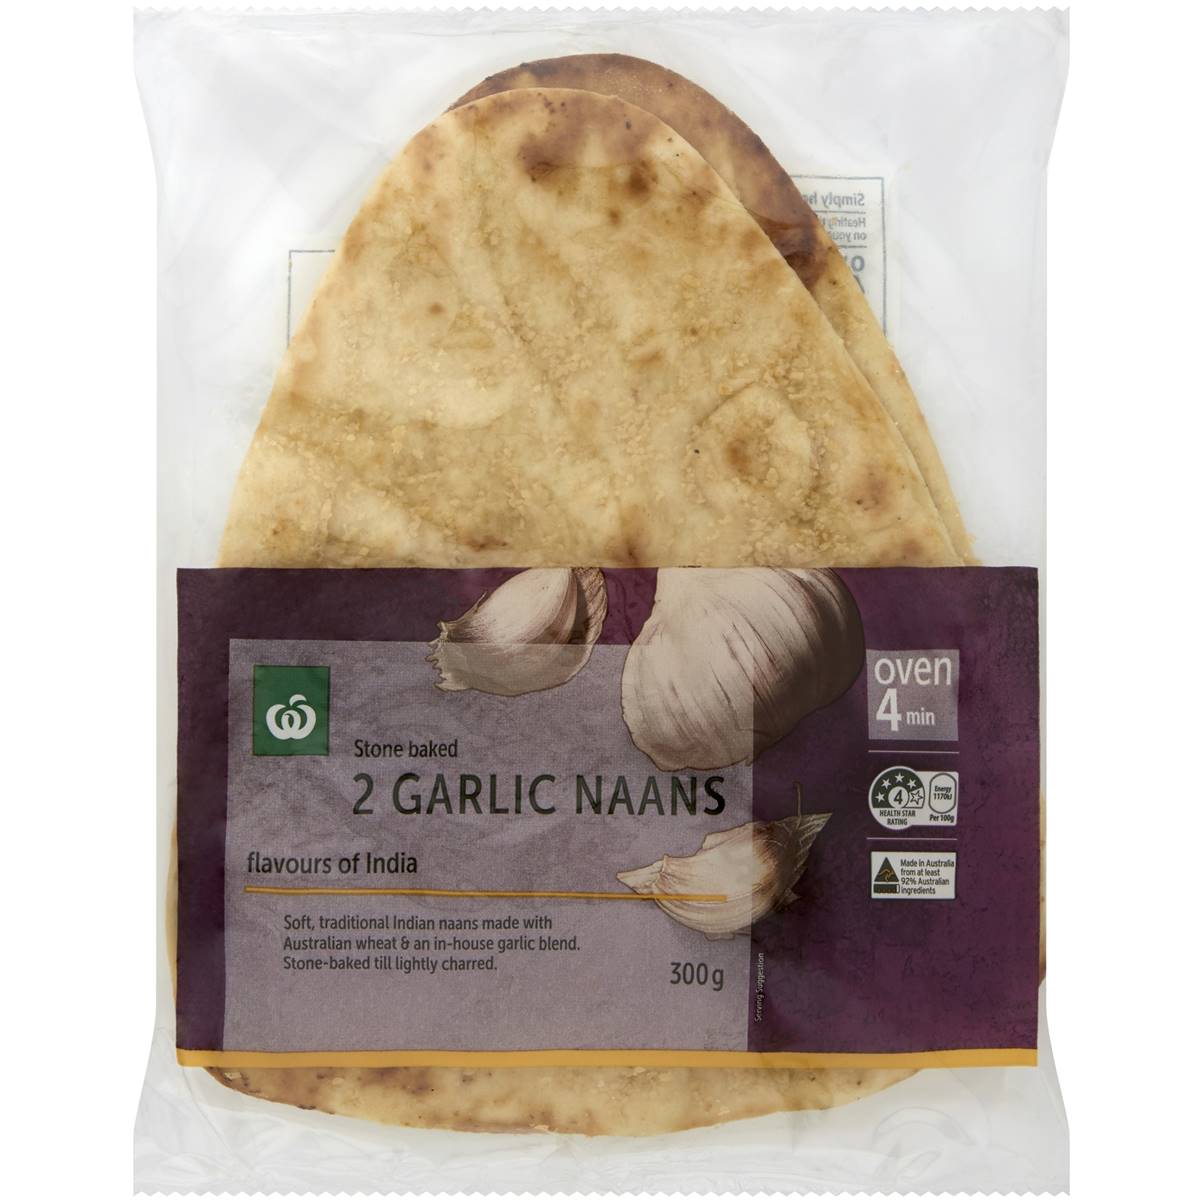 Calories in Woolworths Stone Baked Garlic Naan Bread